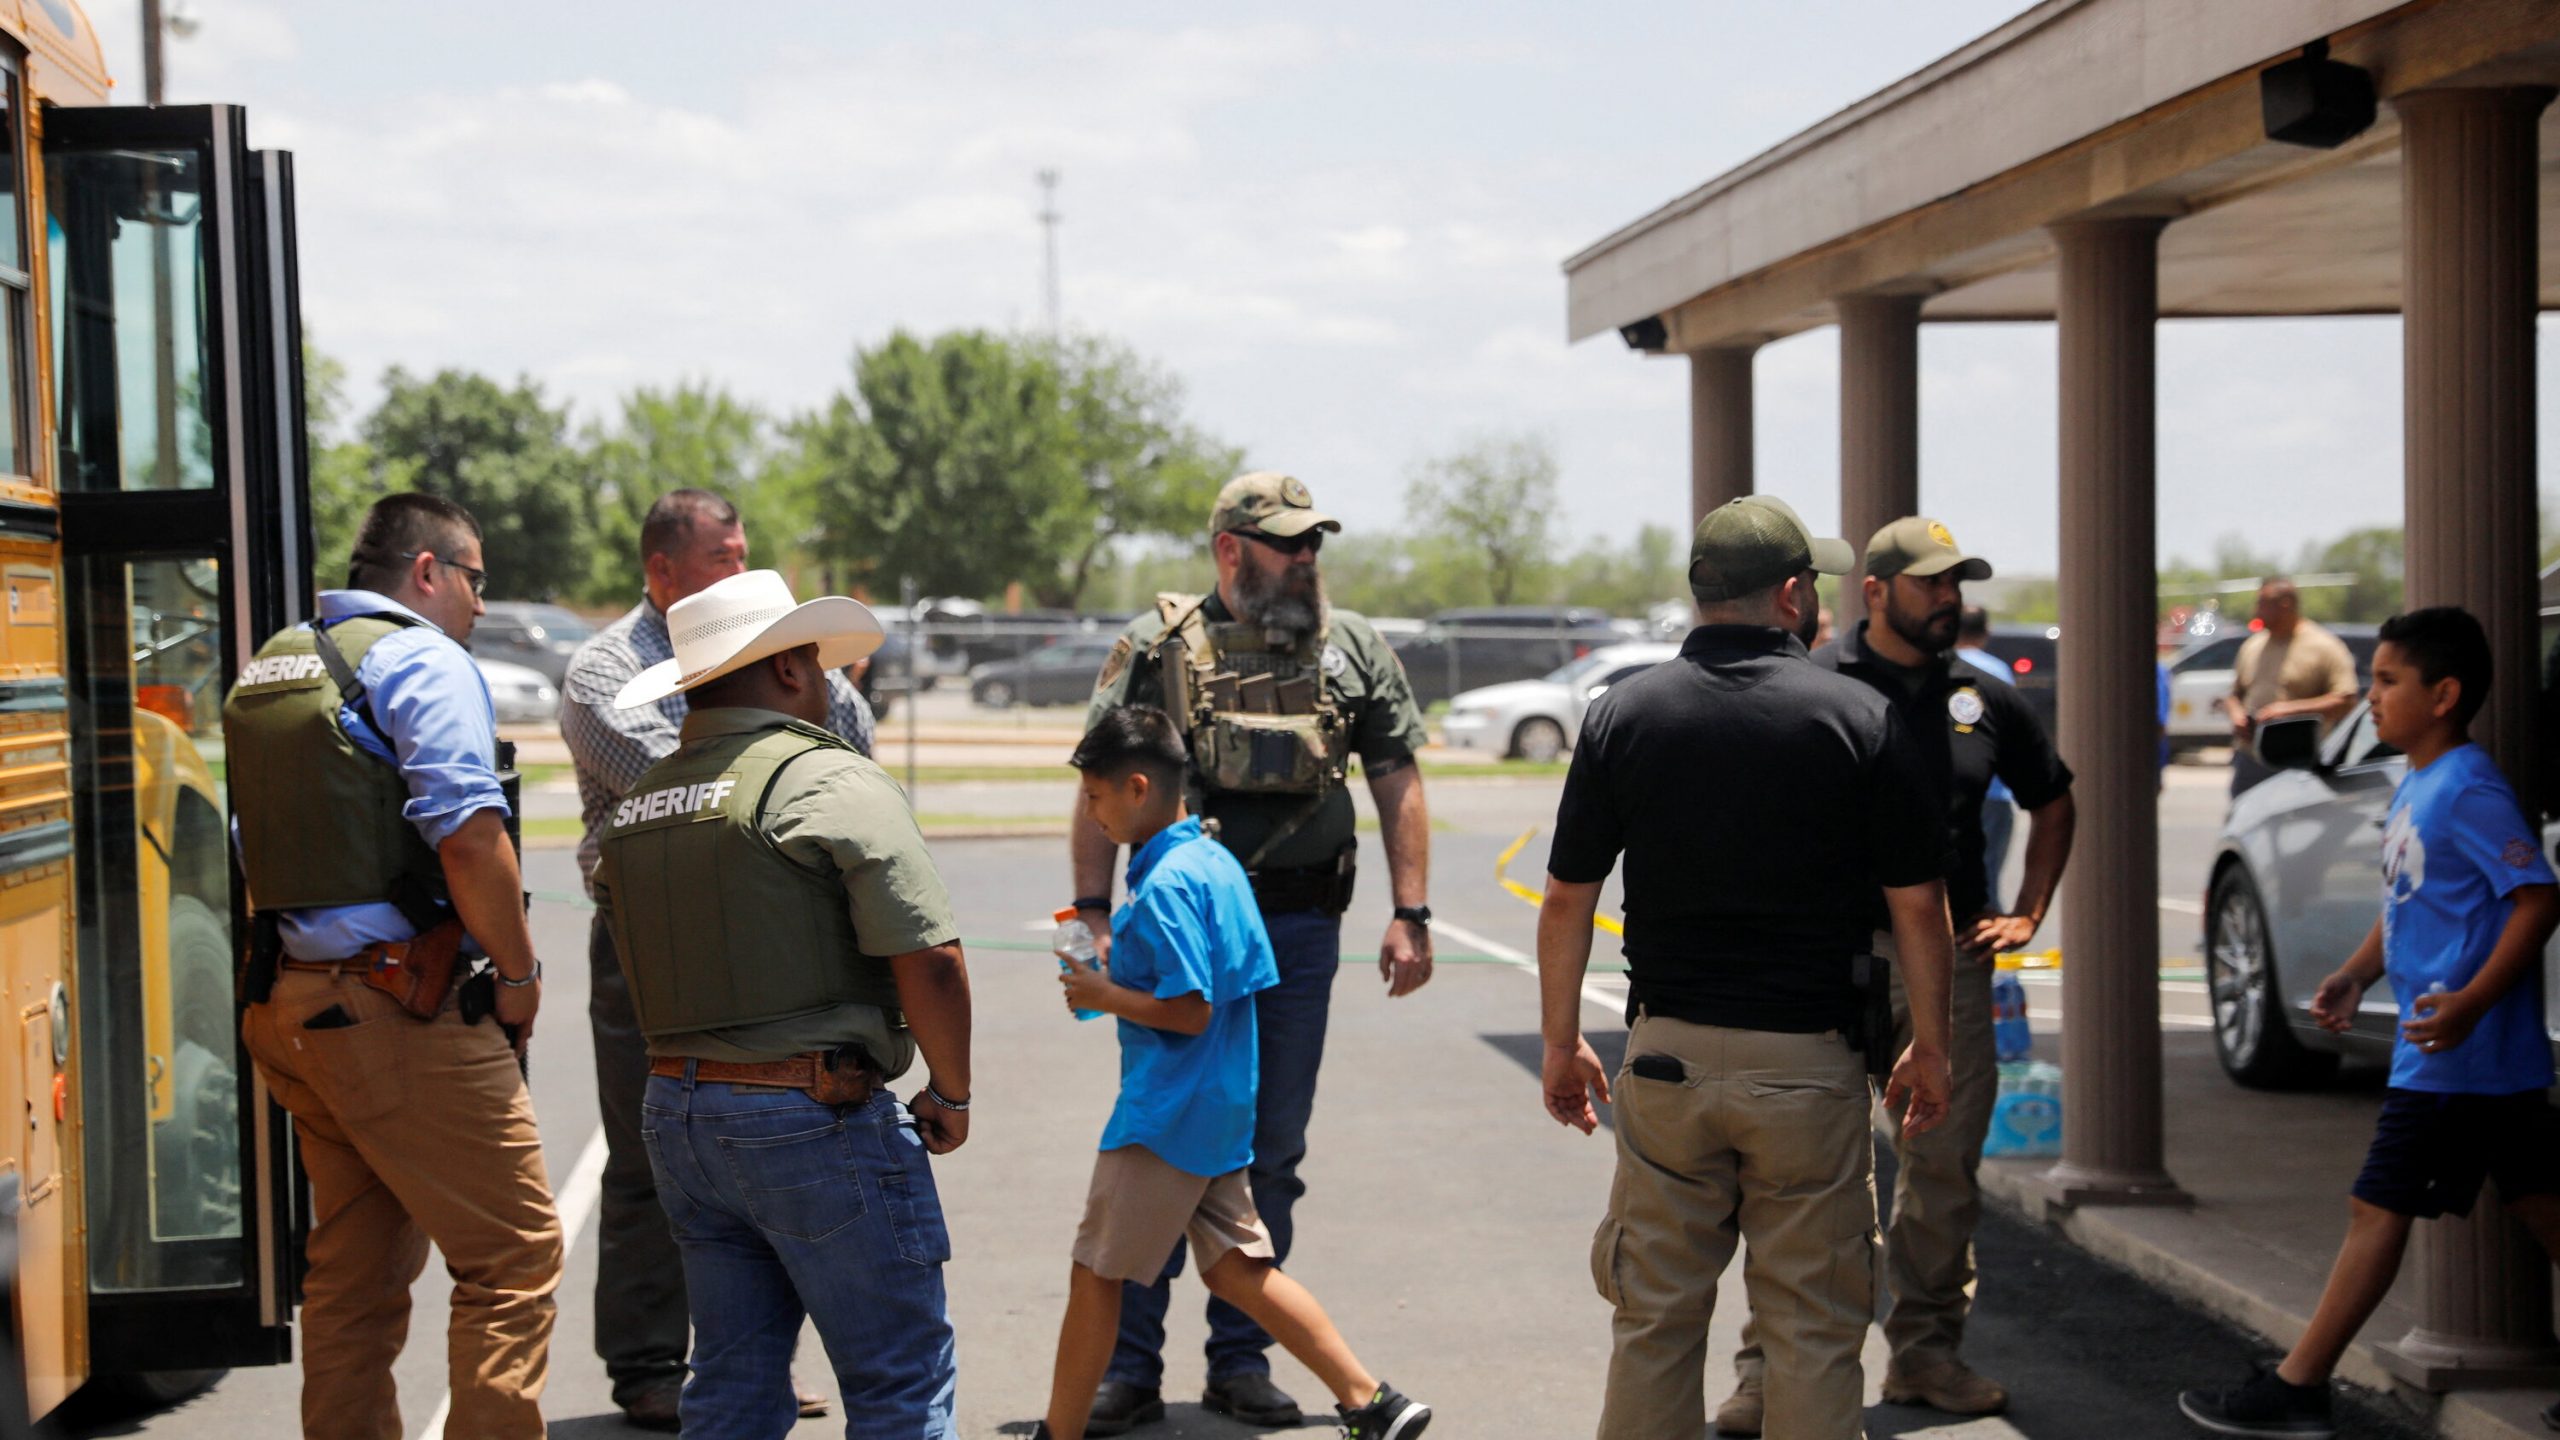 15 shot dead in attack at a primary school in Texas